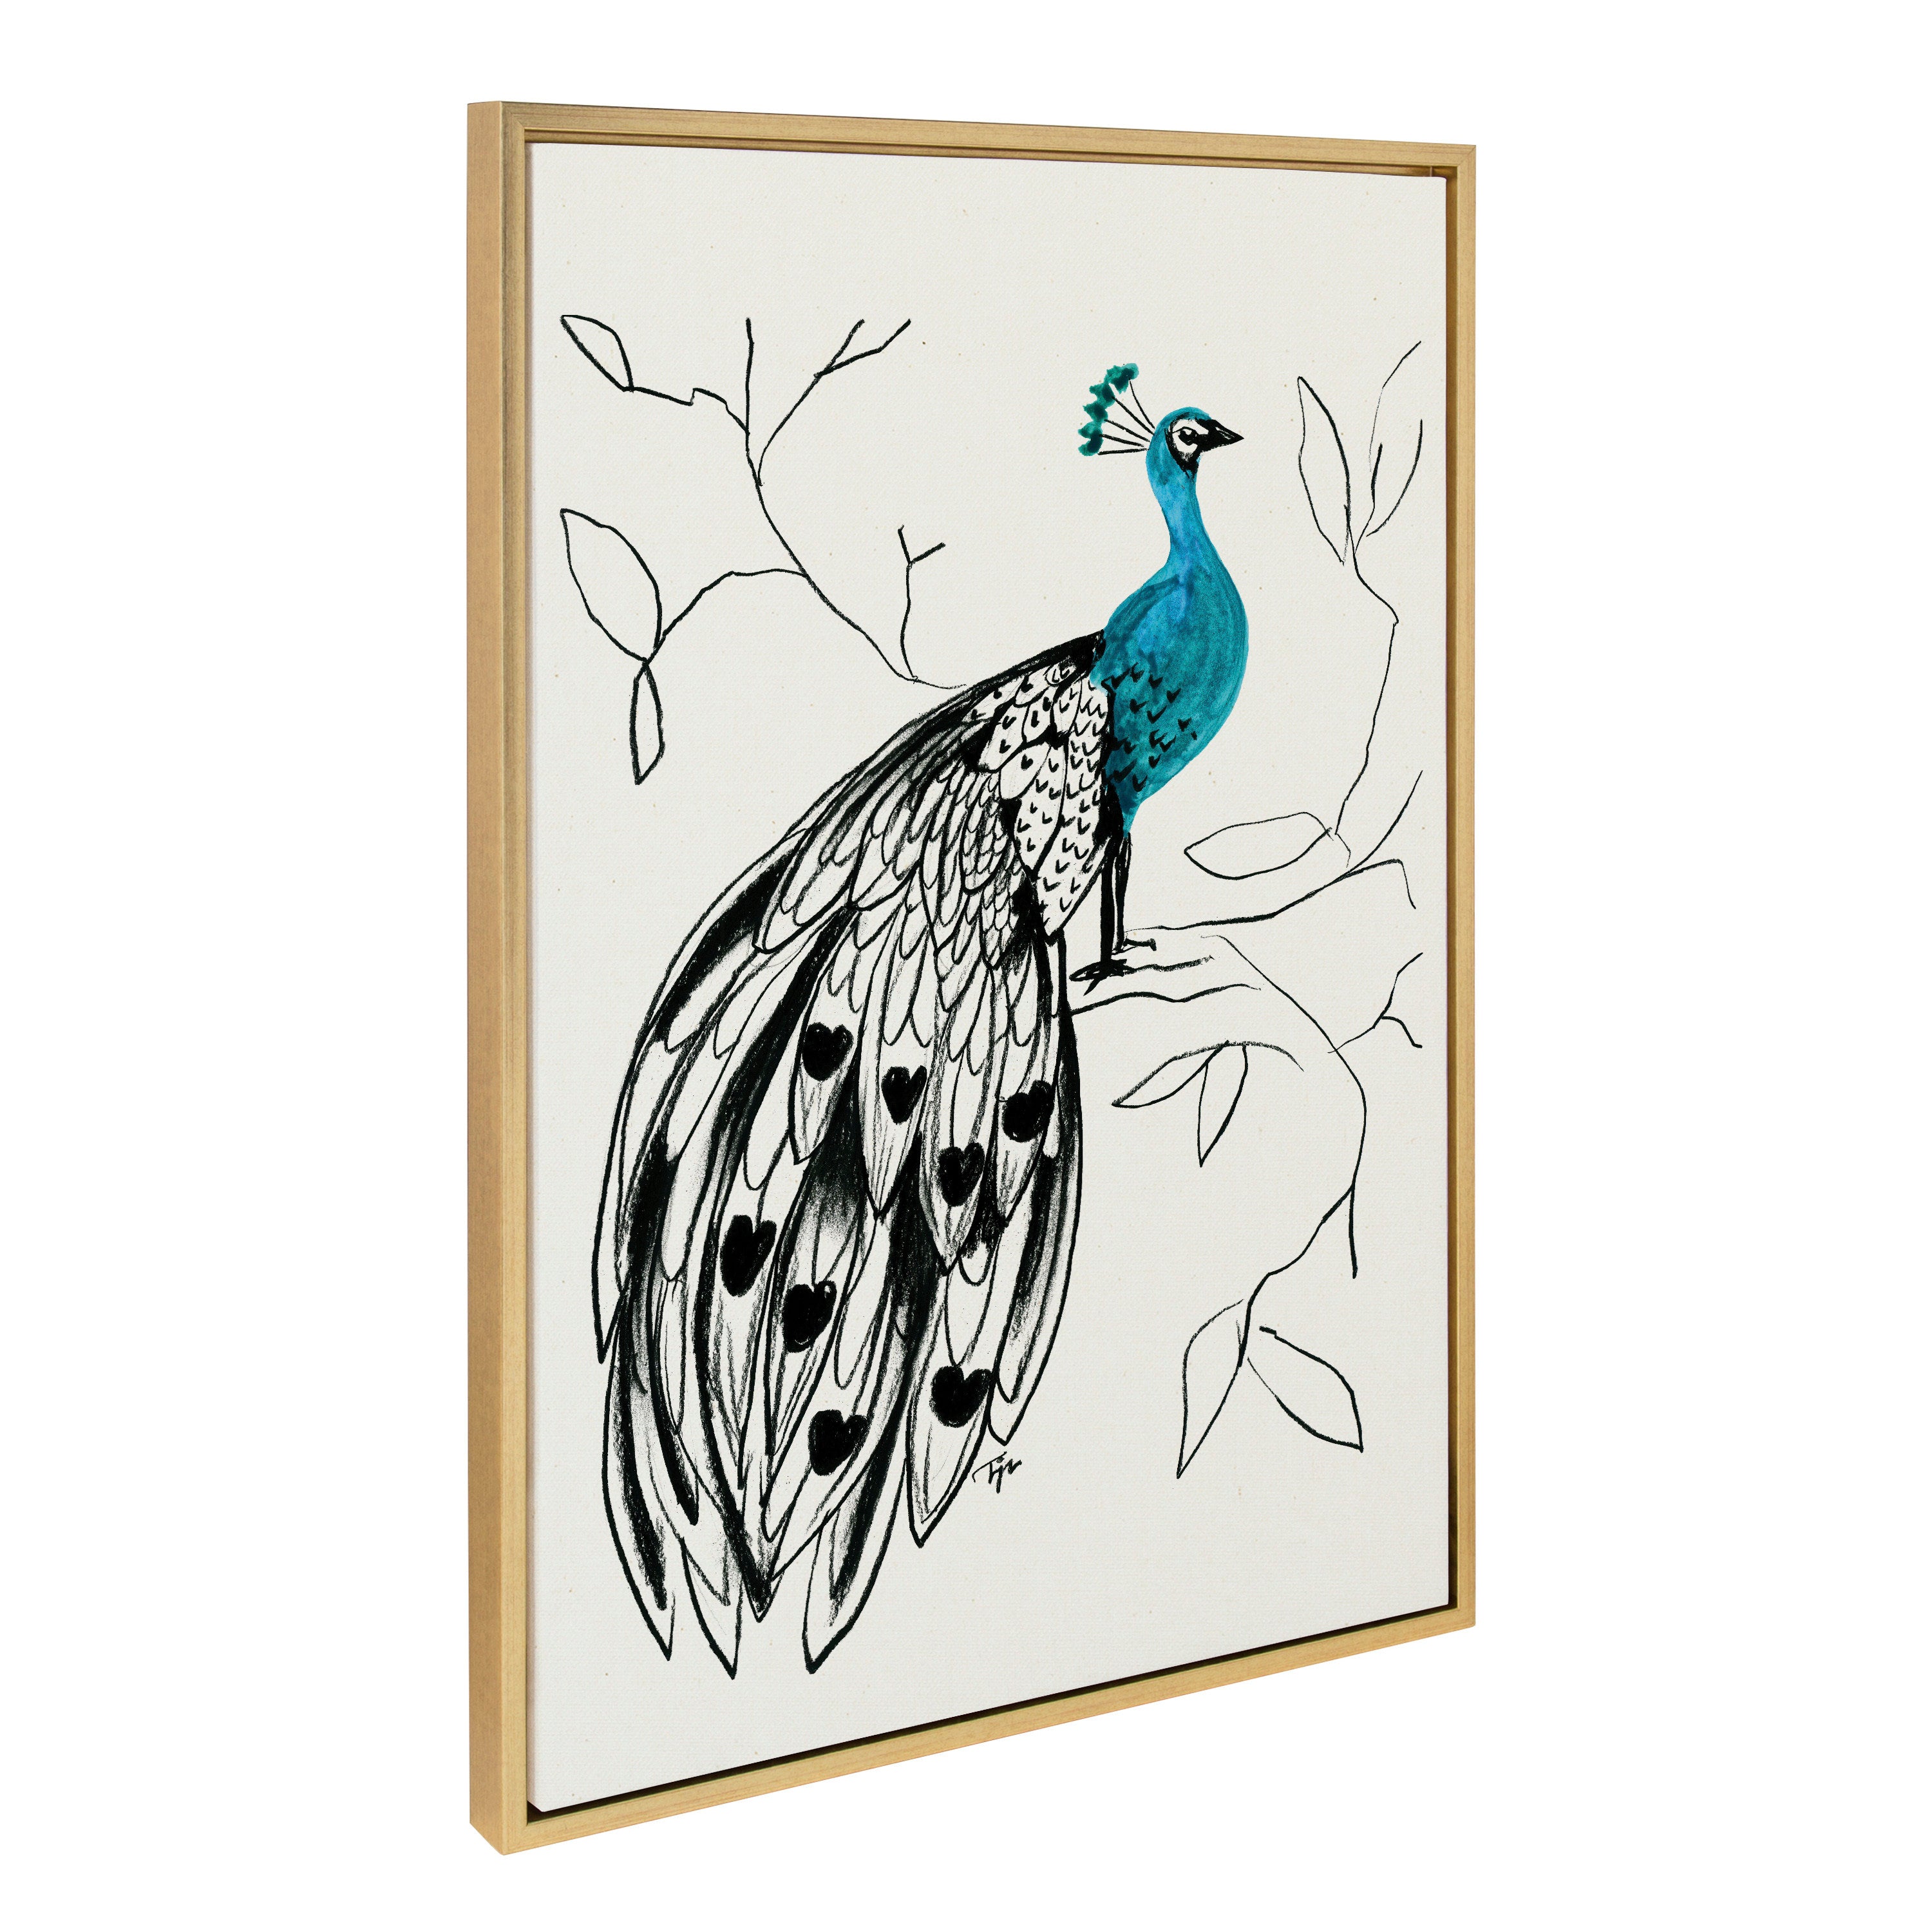 Sylvie 658 Peacock Framed Canvas by Teju Reval of SnazzyHues